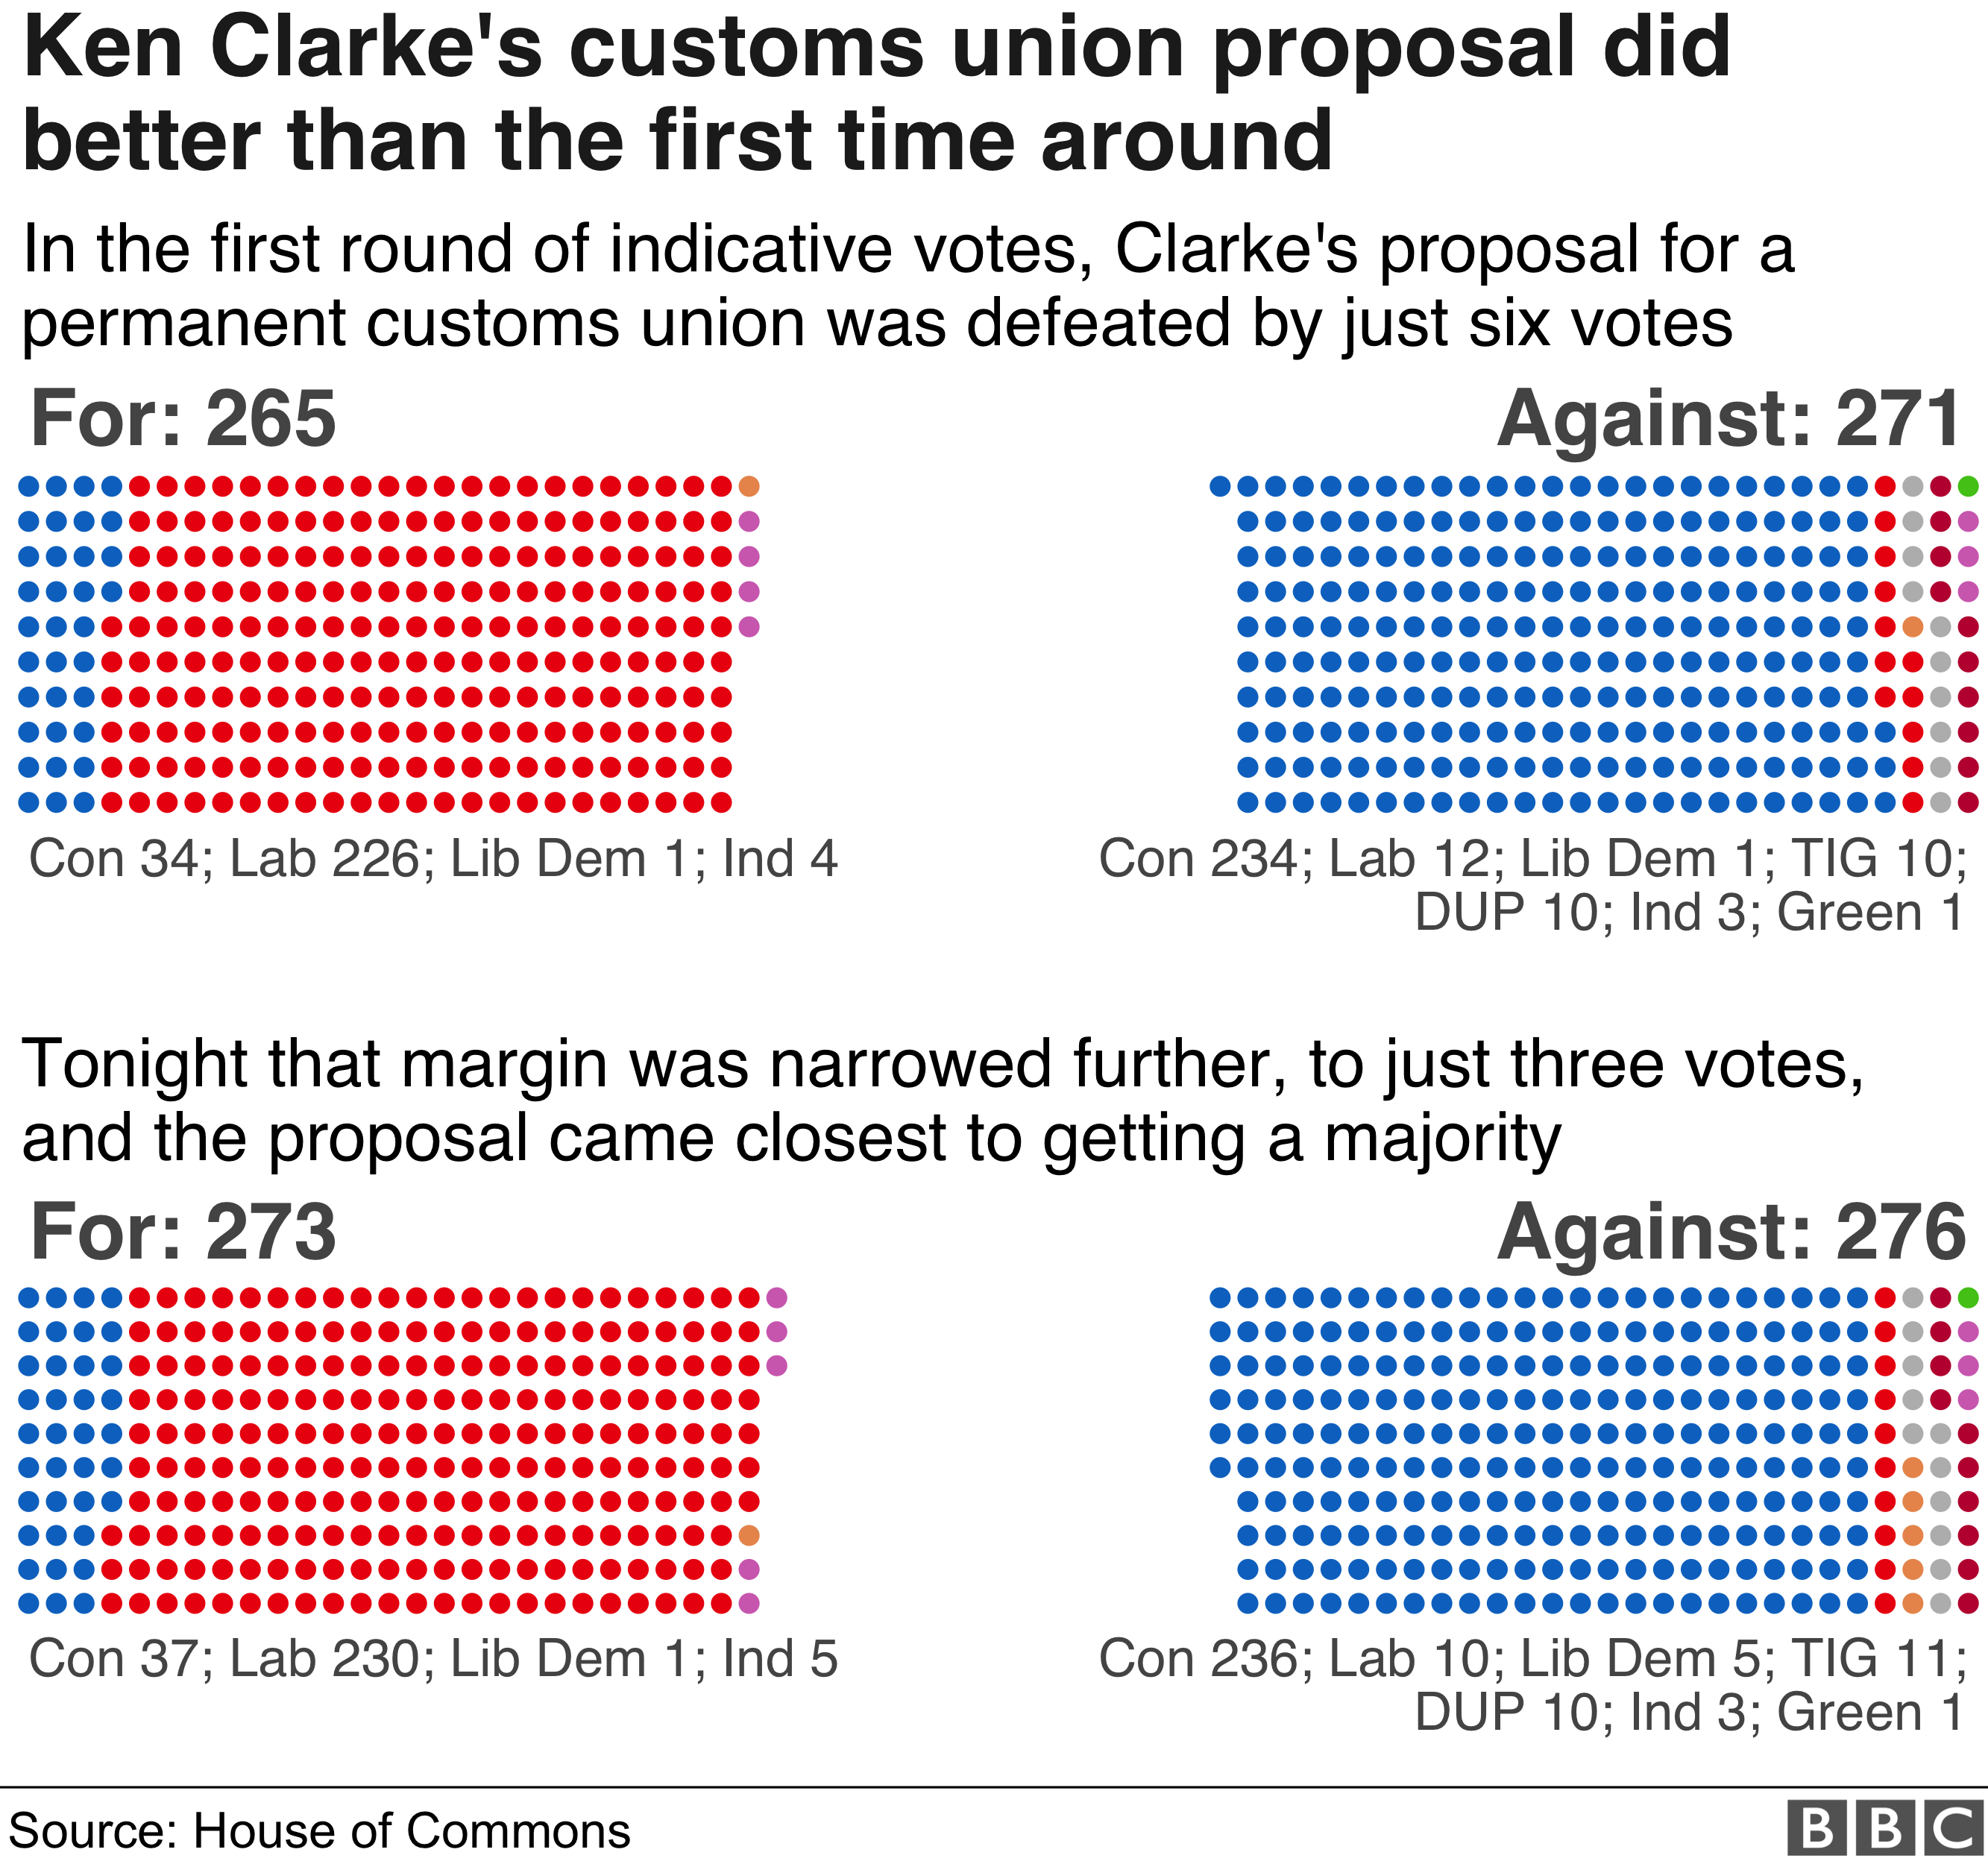 Ken Clarke's proposal came closest to securing a majority again